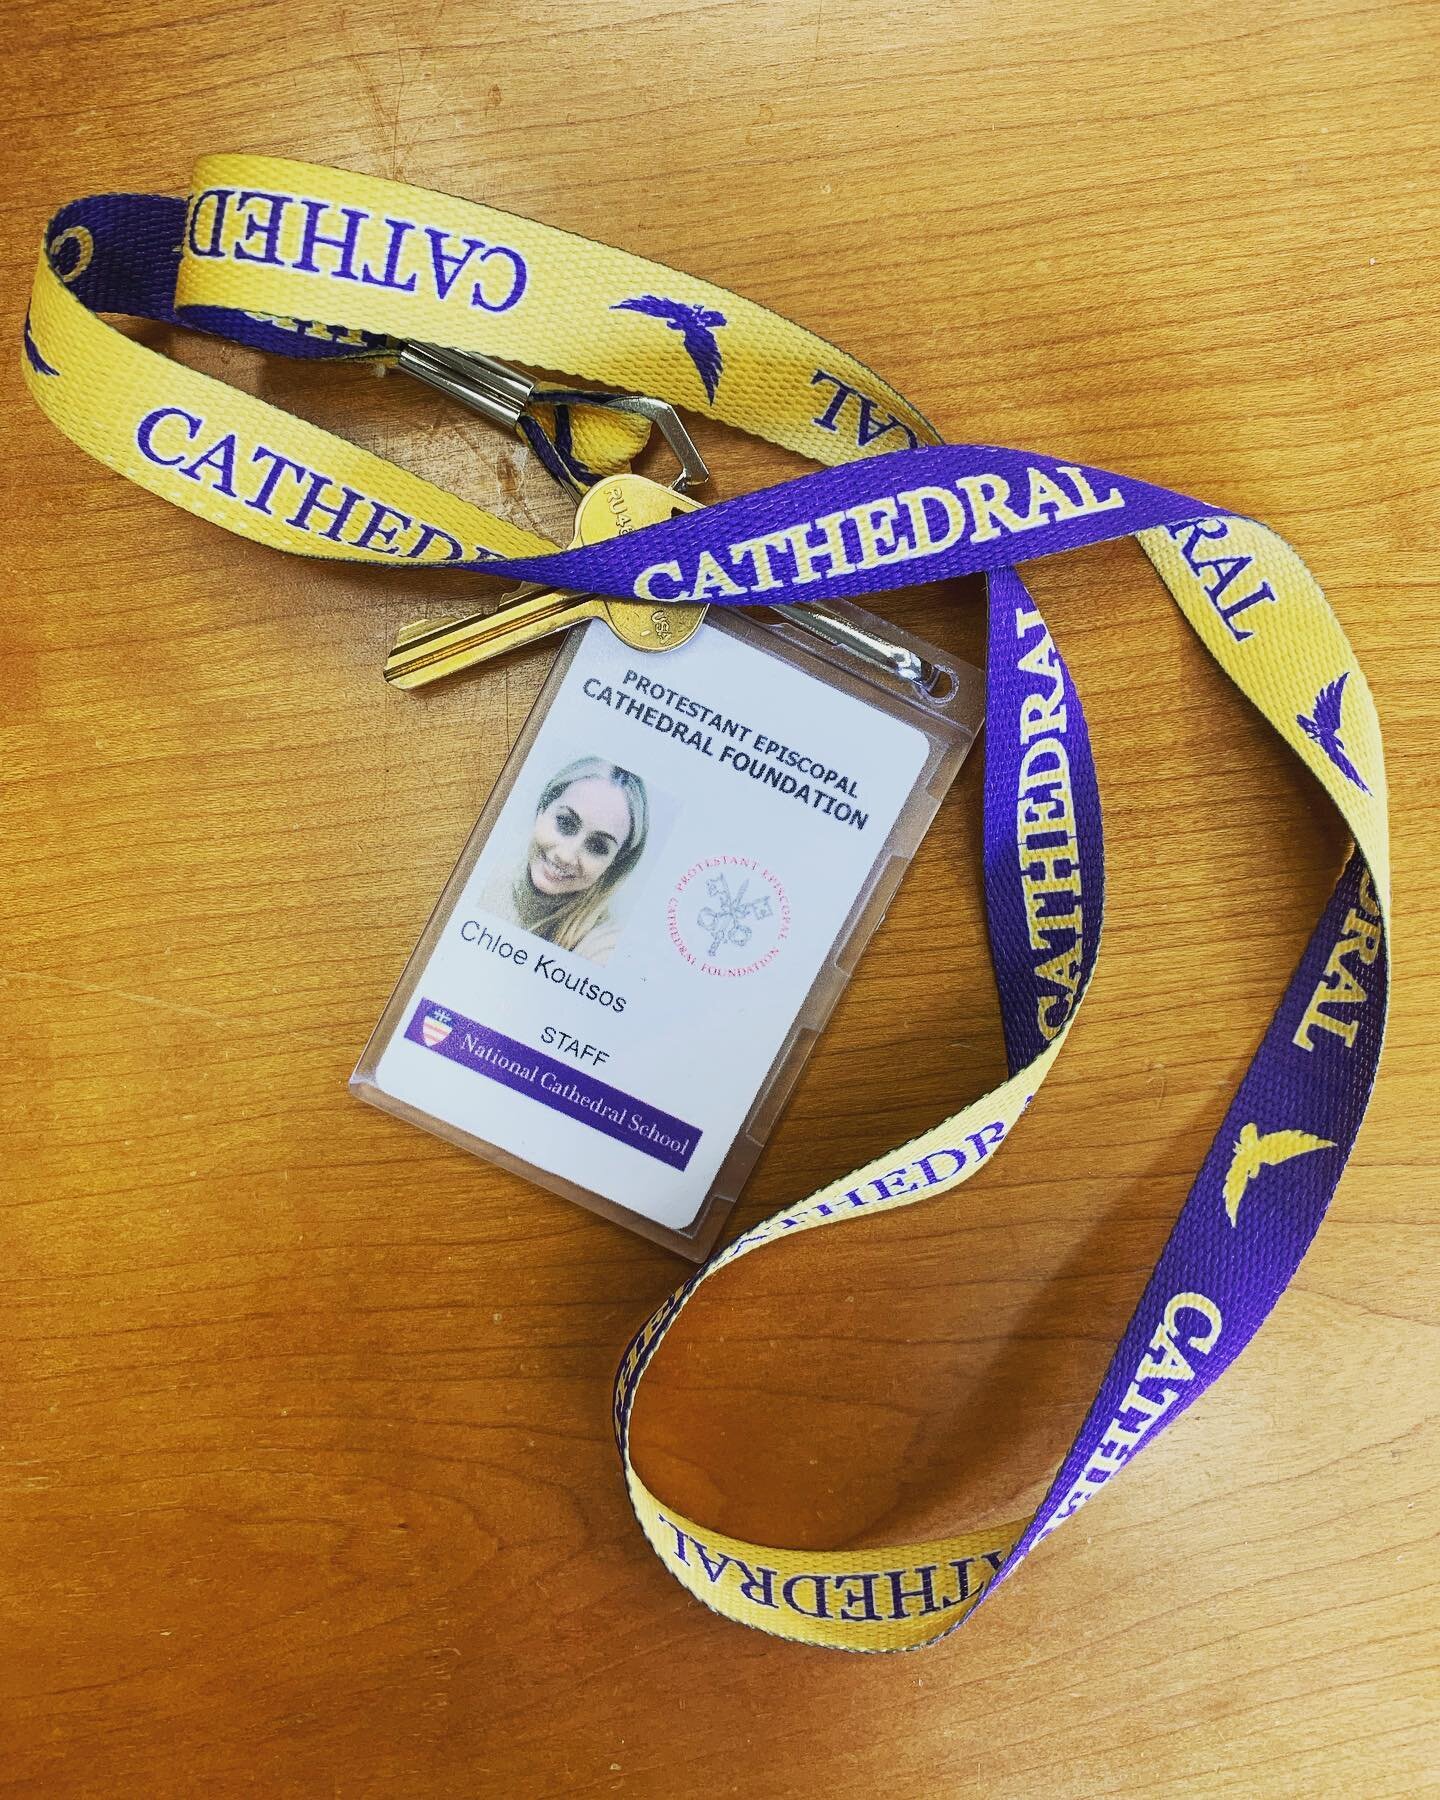 Last year, I had the absolute pleasure and privilege of serving as the Interim Upper School Counselor at National Cathedral School. What an amazing school and community. Happy 1st day Eagles!! #grateful #schoolcounselor #upperschoolcounselors #profes